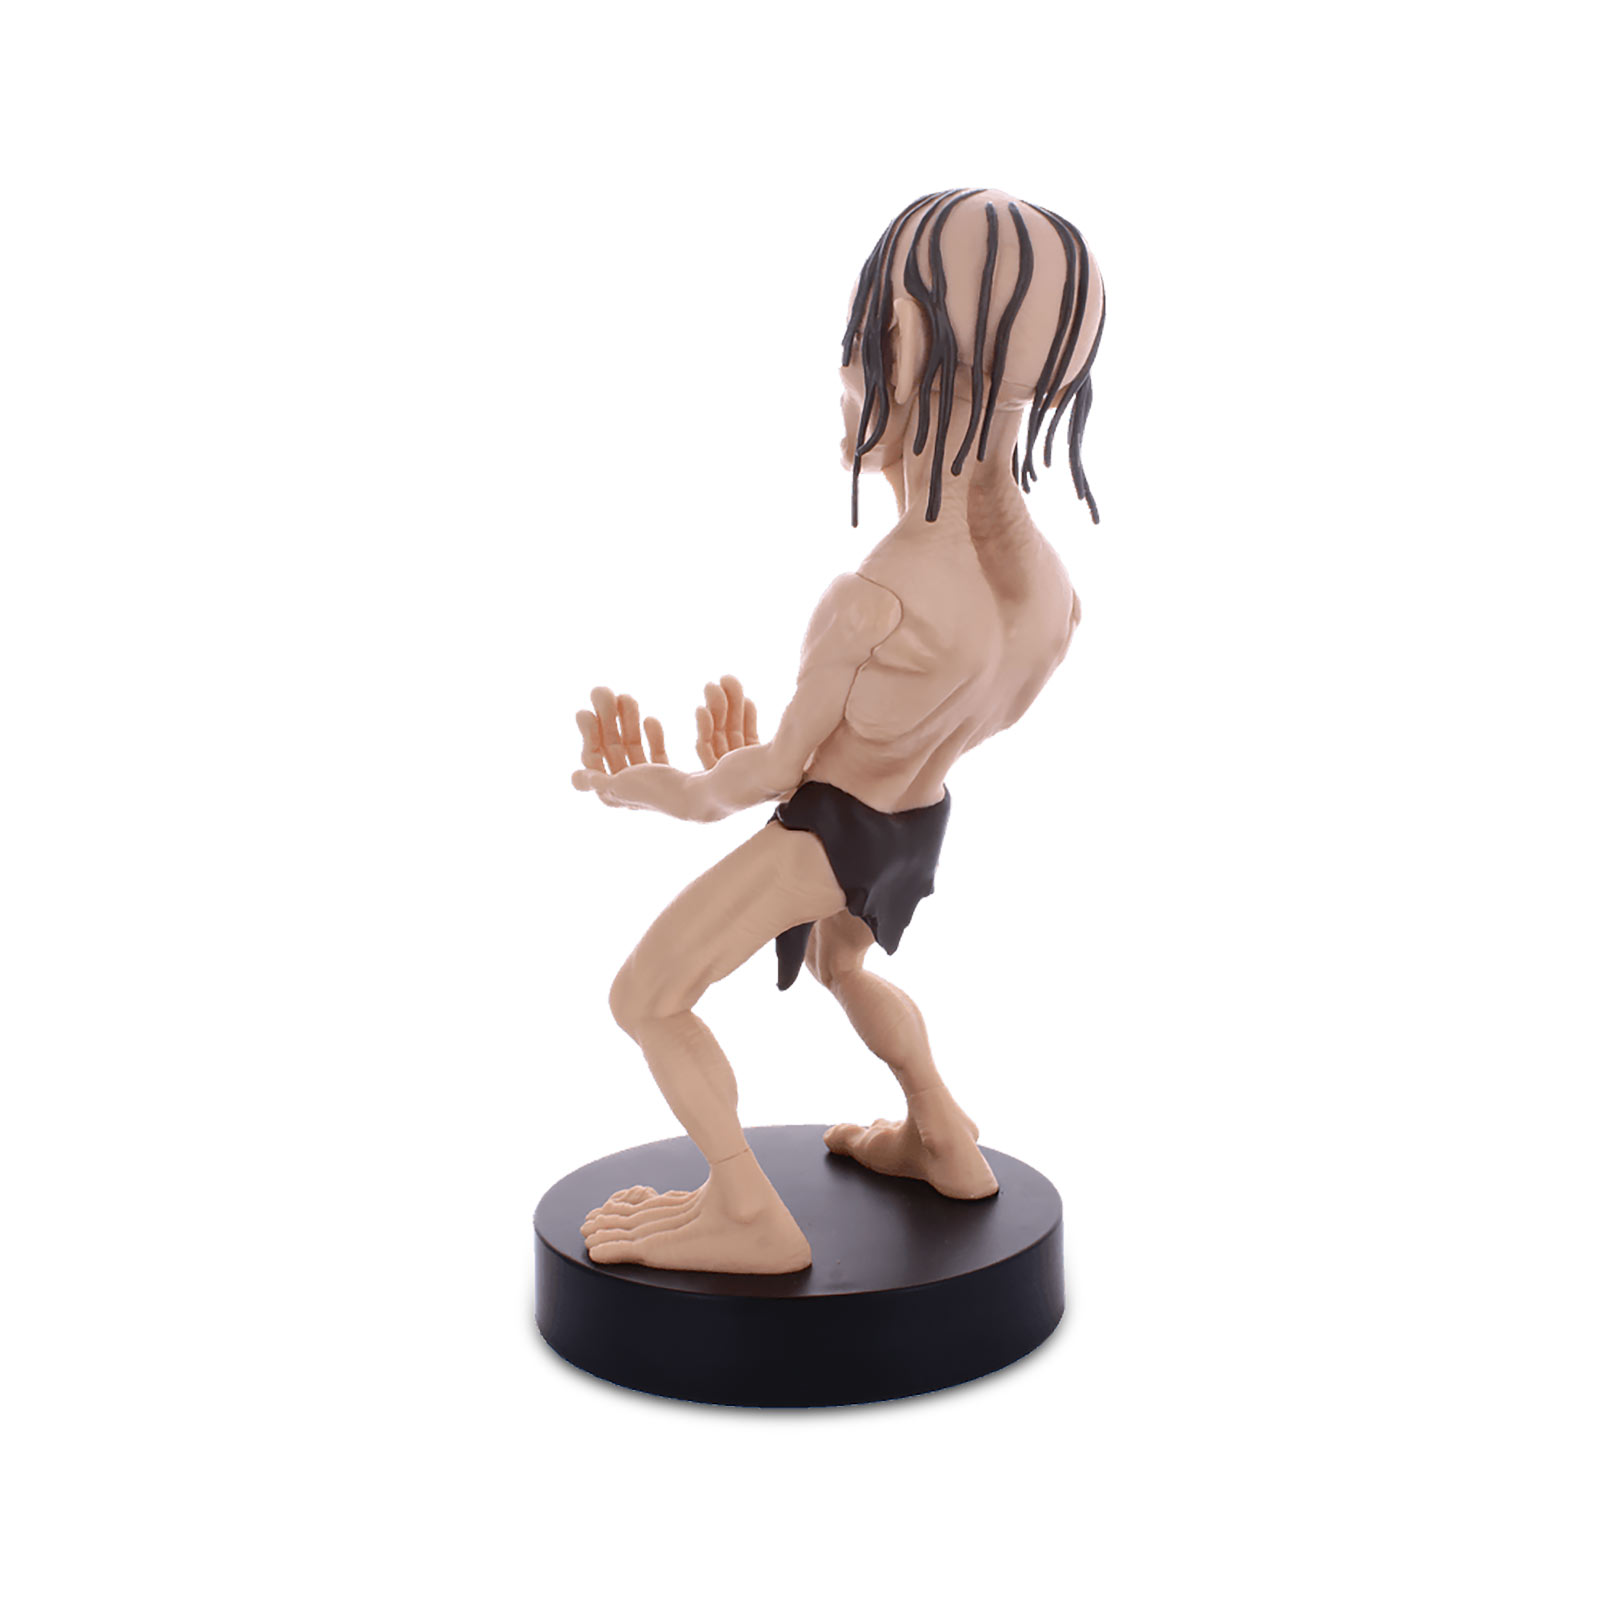 Lord of the Rings - Gollum Cable Guy Figure